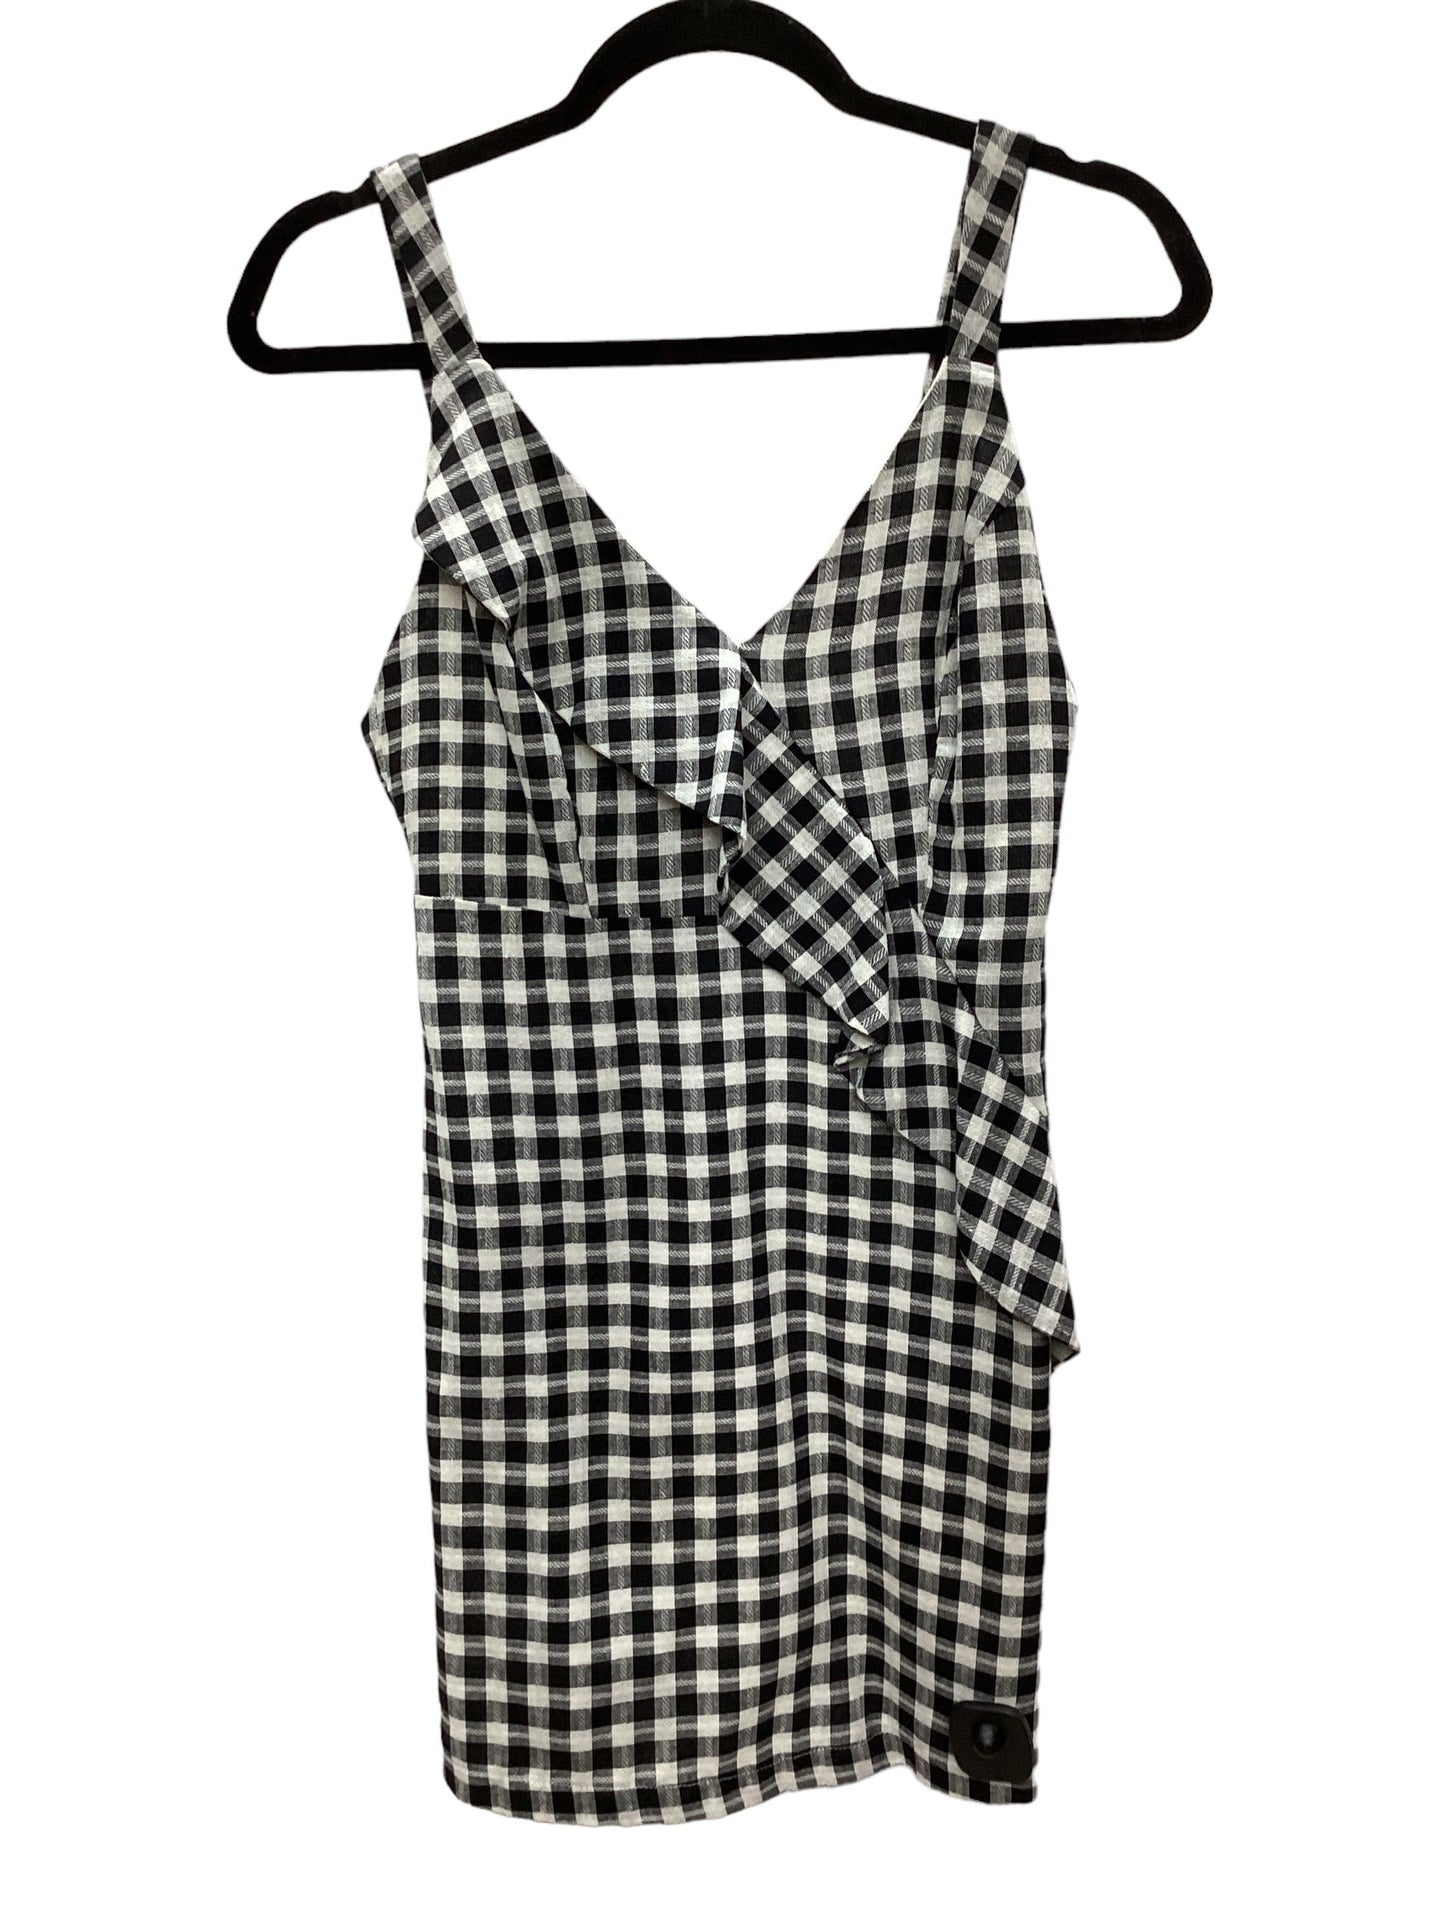 Black & White Dress Casual Short Clothes Mentor, Size S